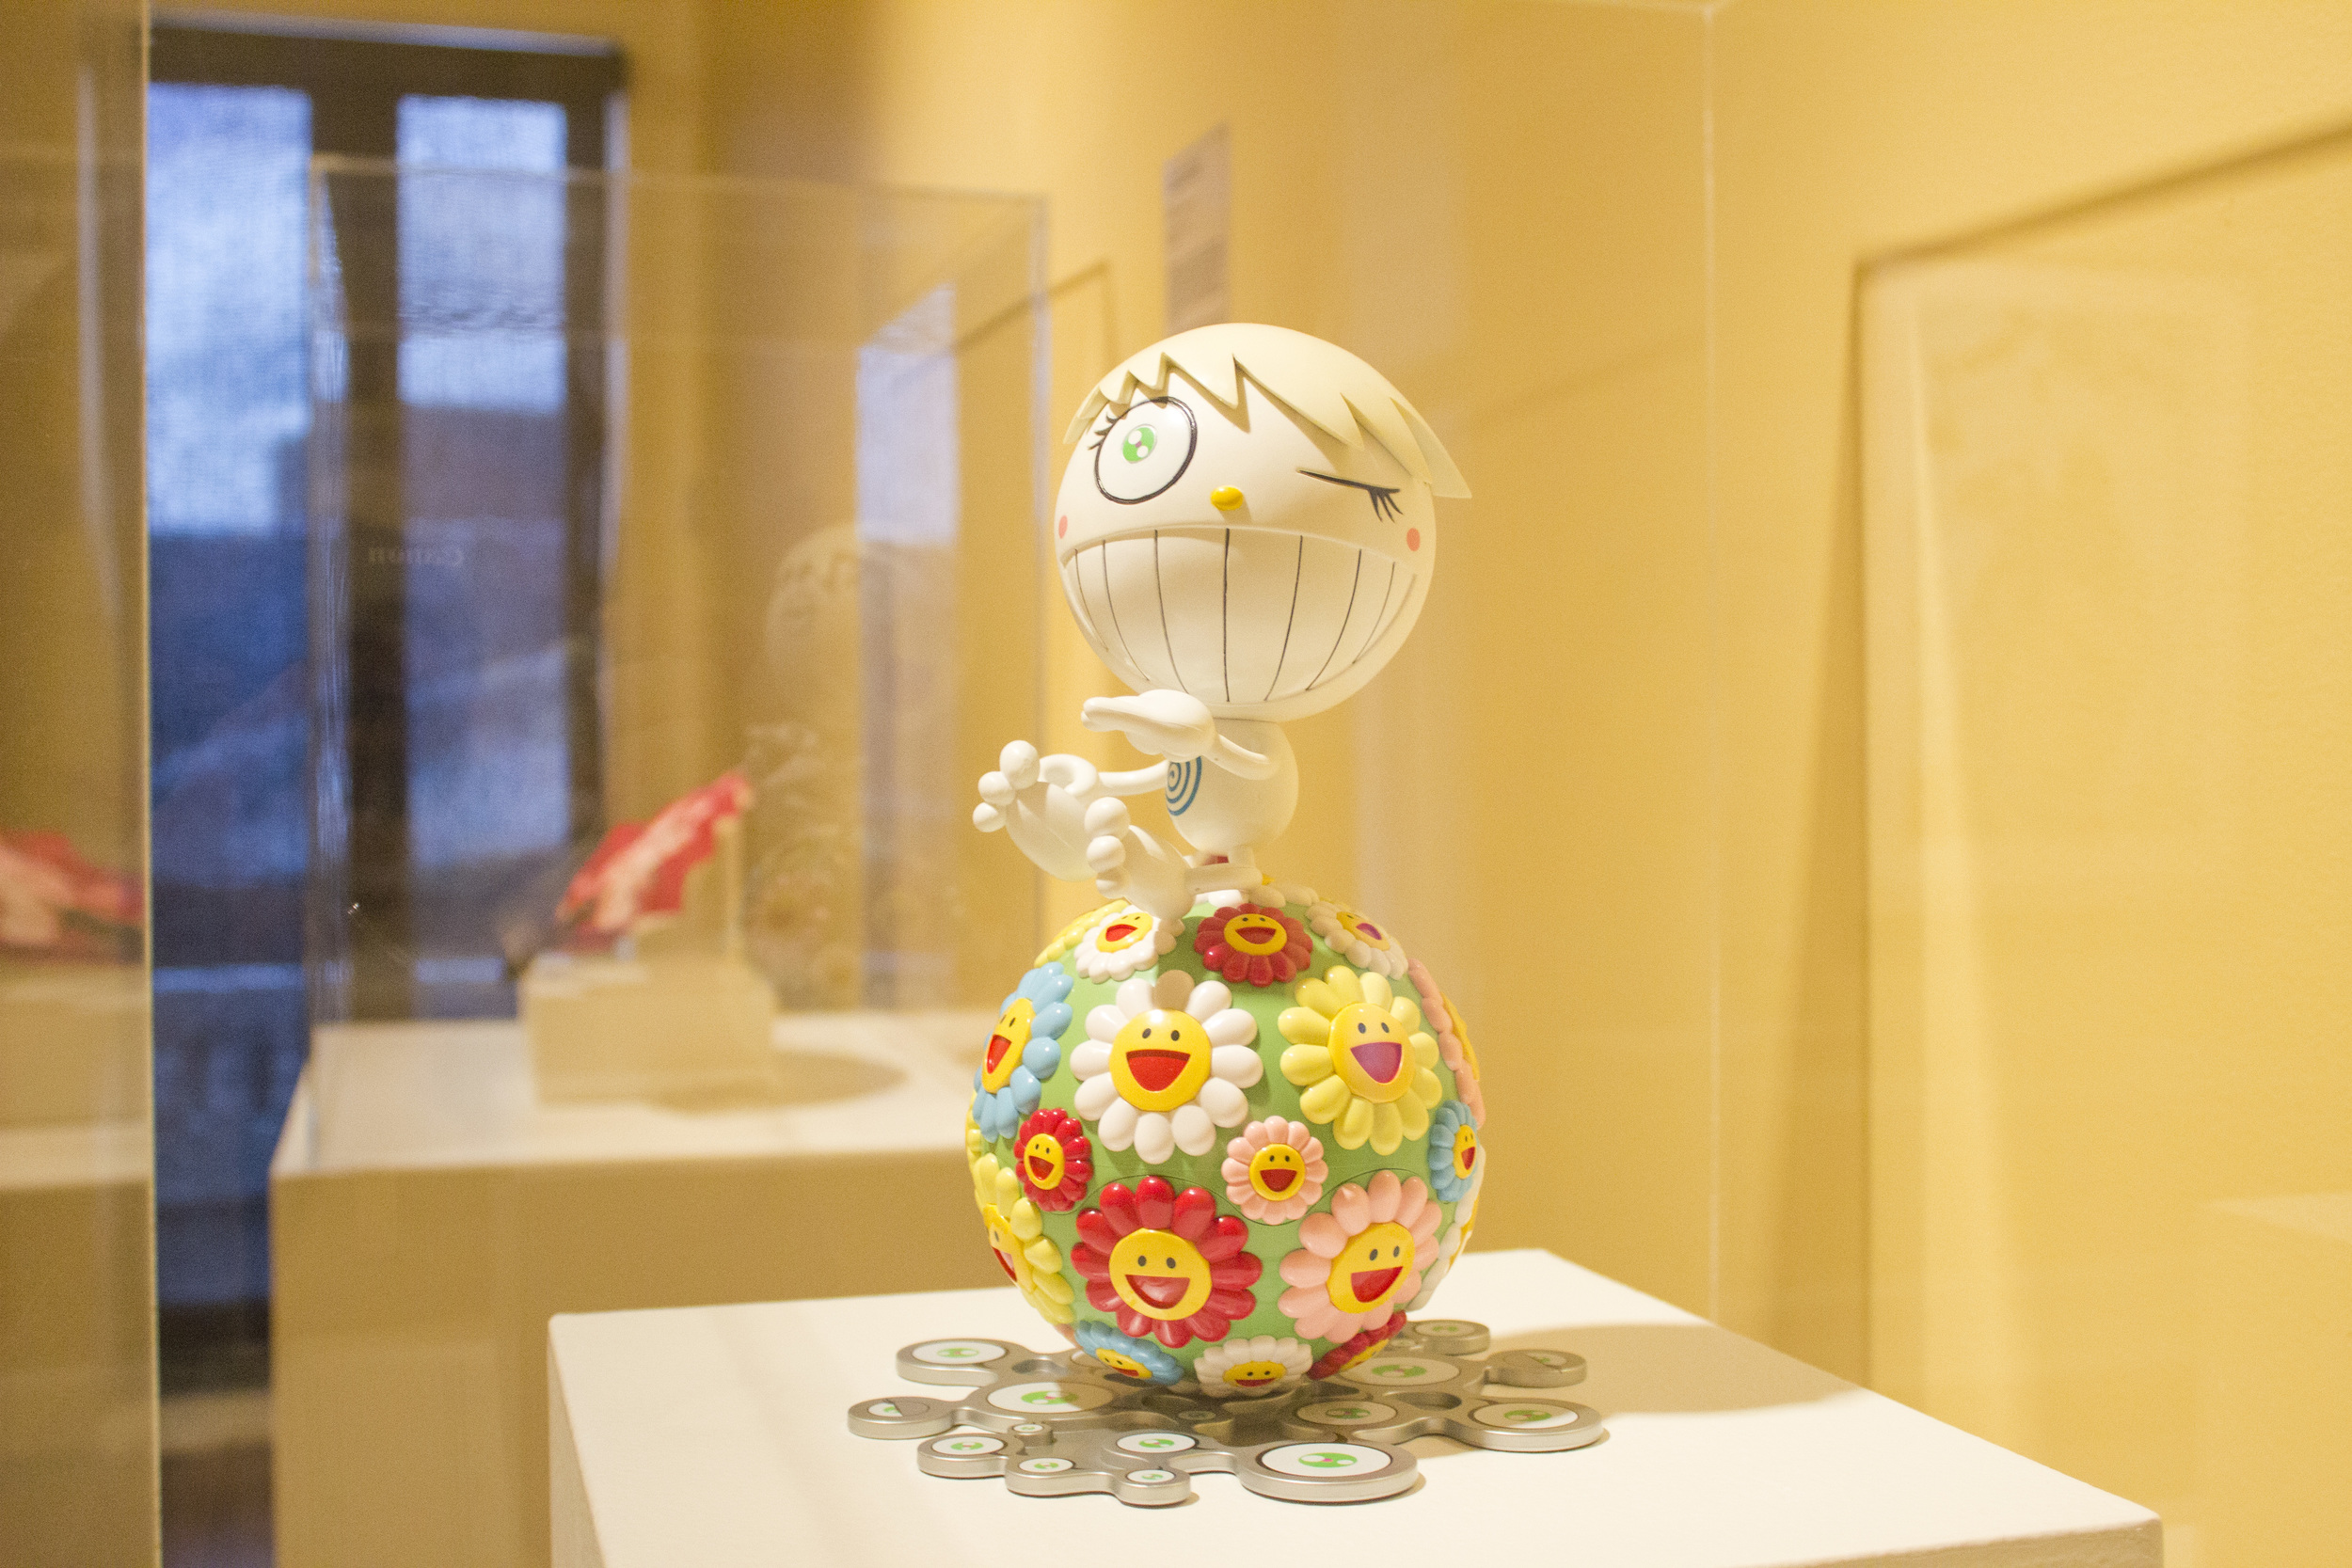 A case of a figure that is smiling and winking made from two balls. The lower section of the figure is covered in smiling flowers.